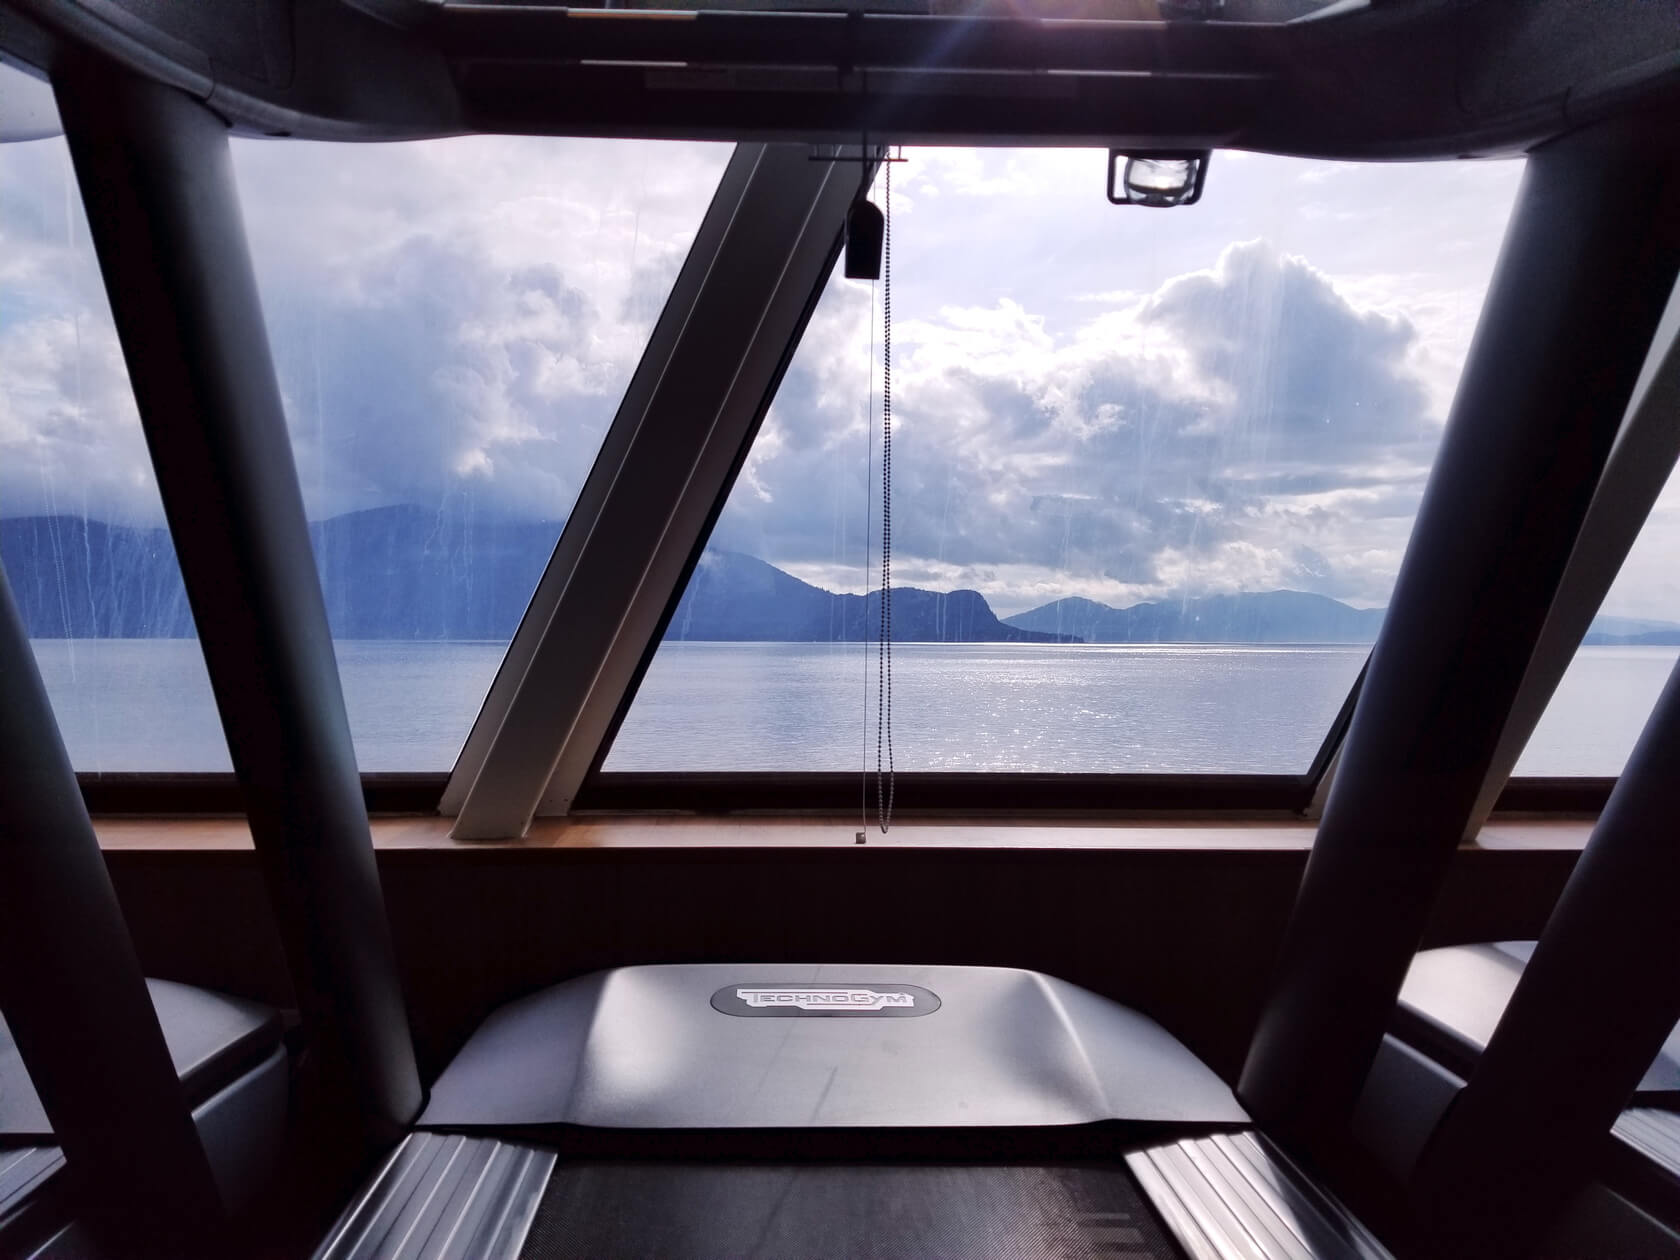 Treadmill with a view